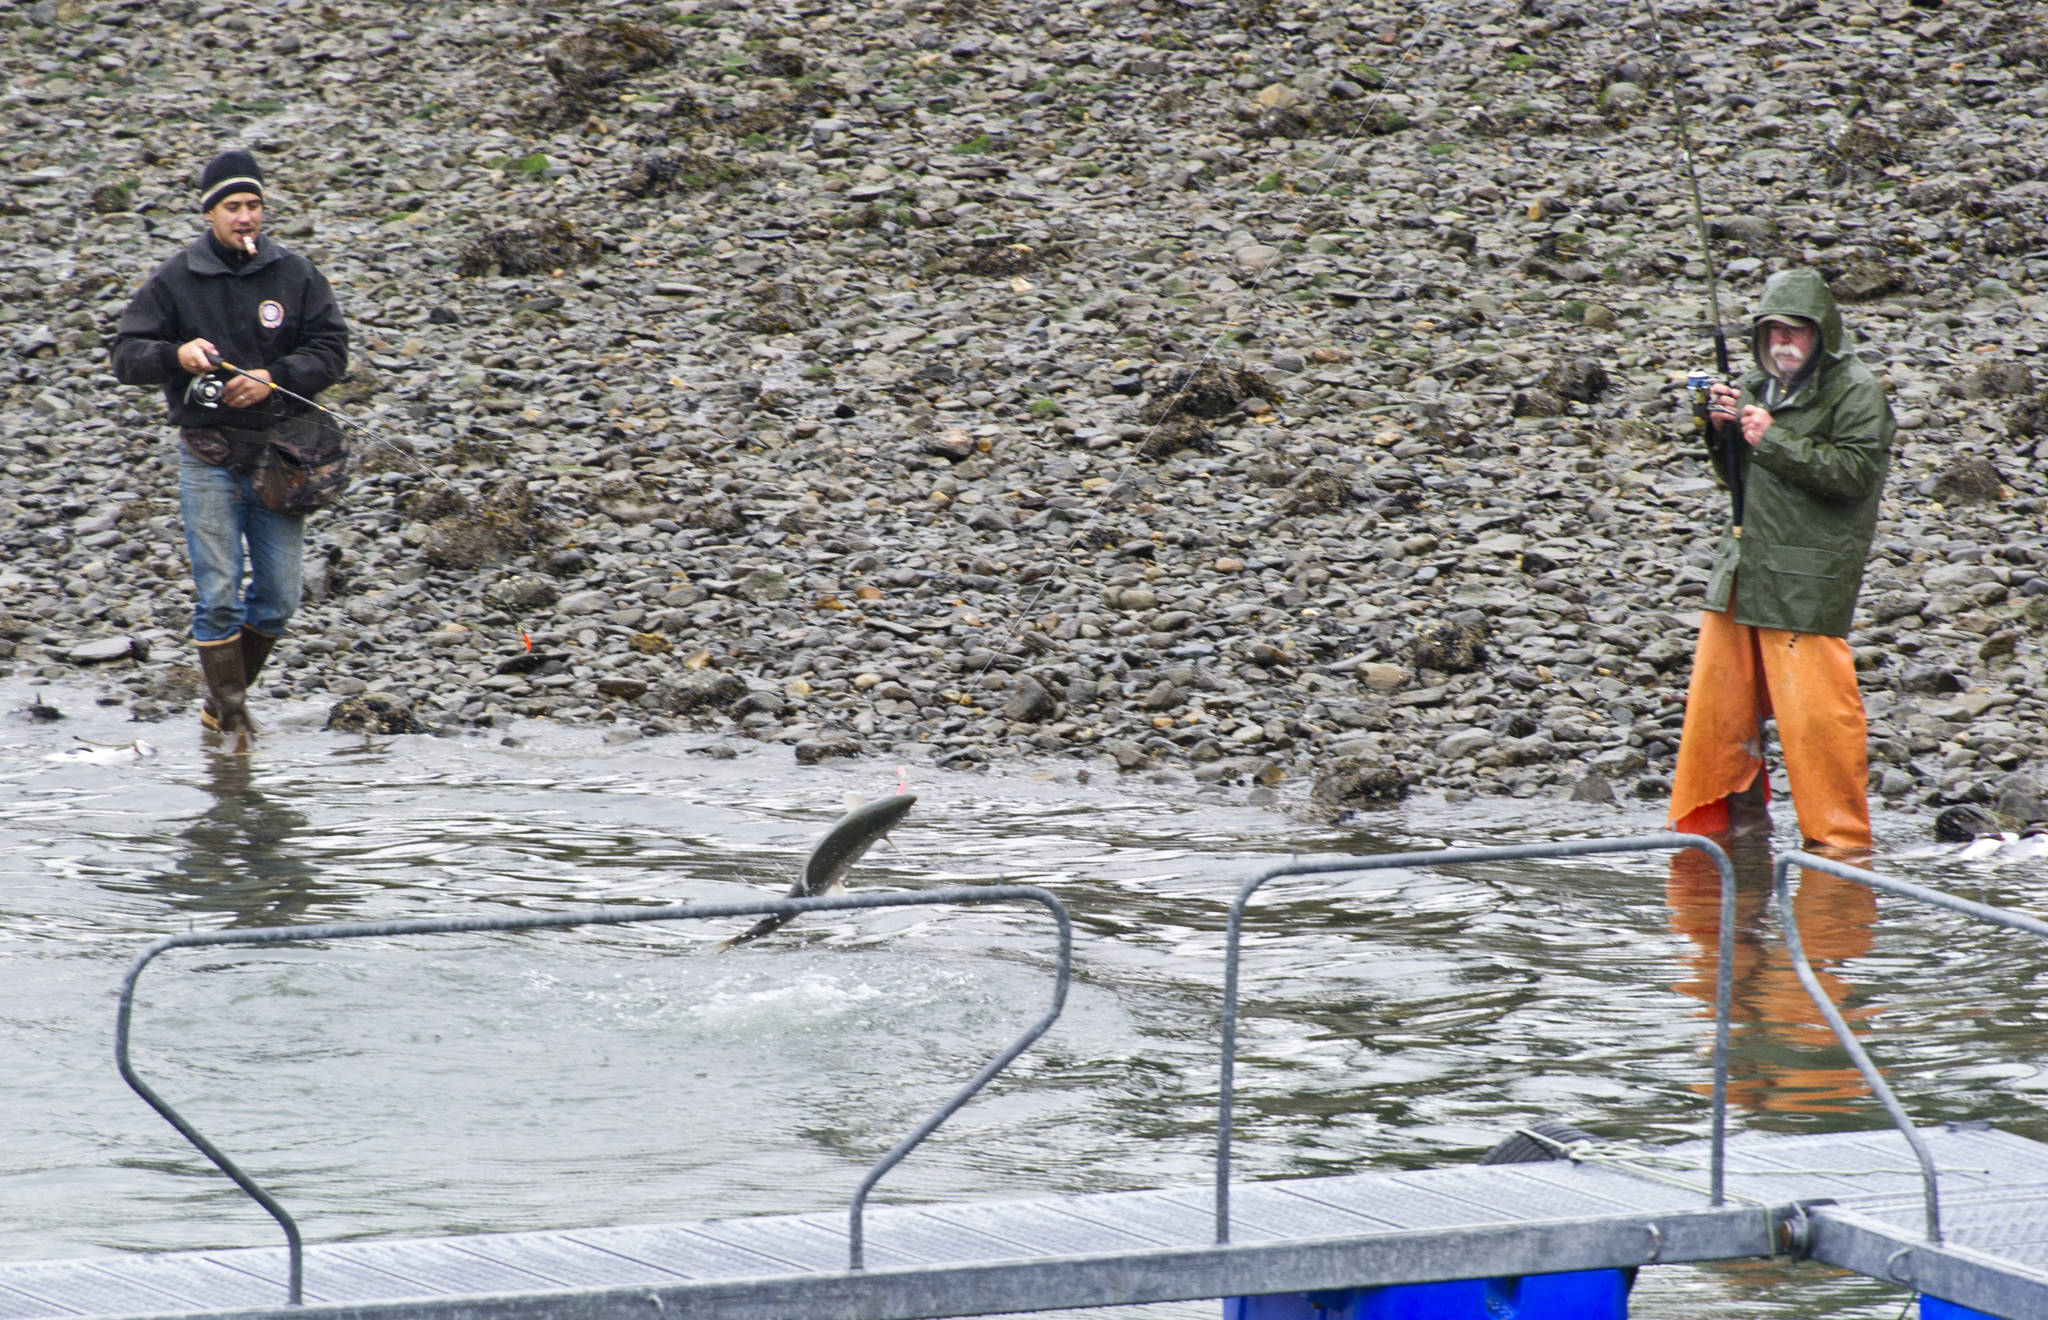 In this September 2015 photo, Greg Gallant, right, fights a silver salmon as Ishiah Campos fishes nearby at the DIPAC Macaulay Salmon Hatchery. (Michael Penn | Juneau Empire File)